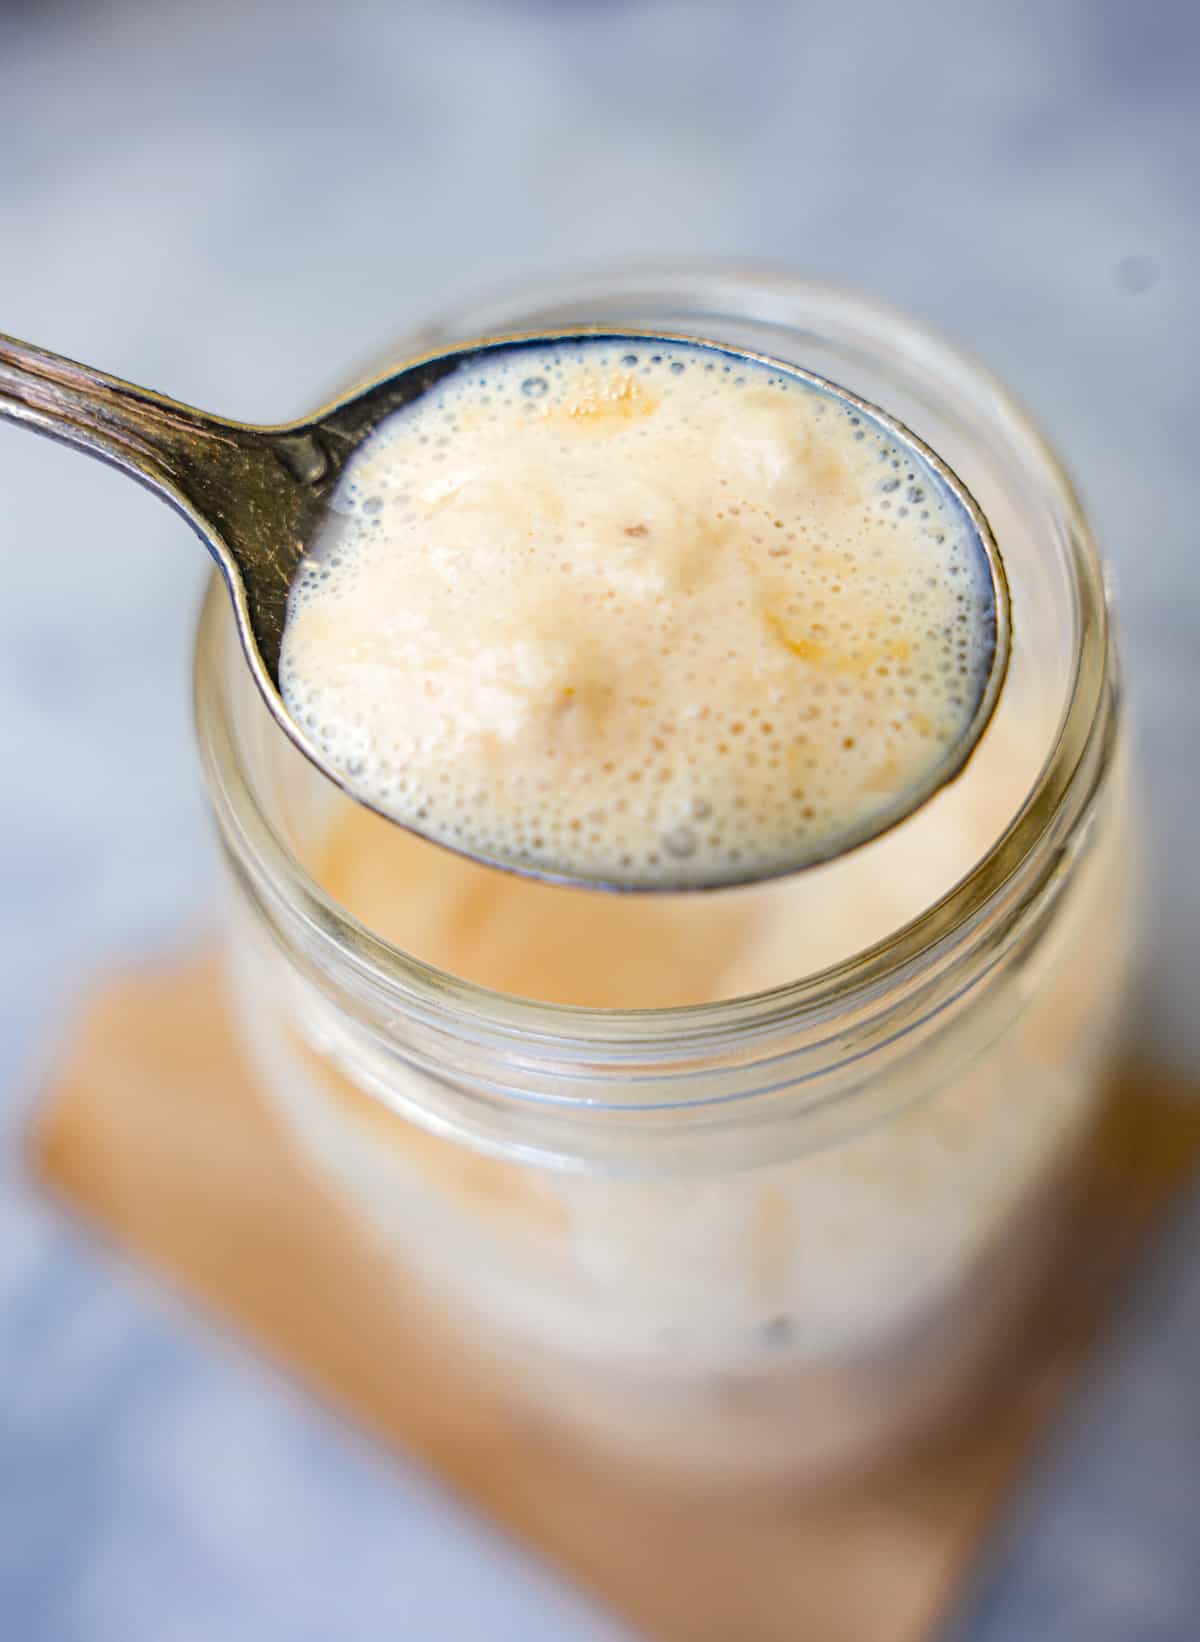 Bloomed yeast in a spoon above a jar.